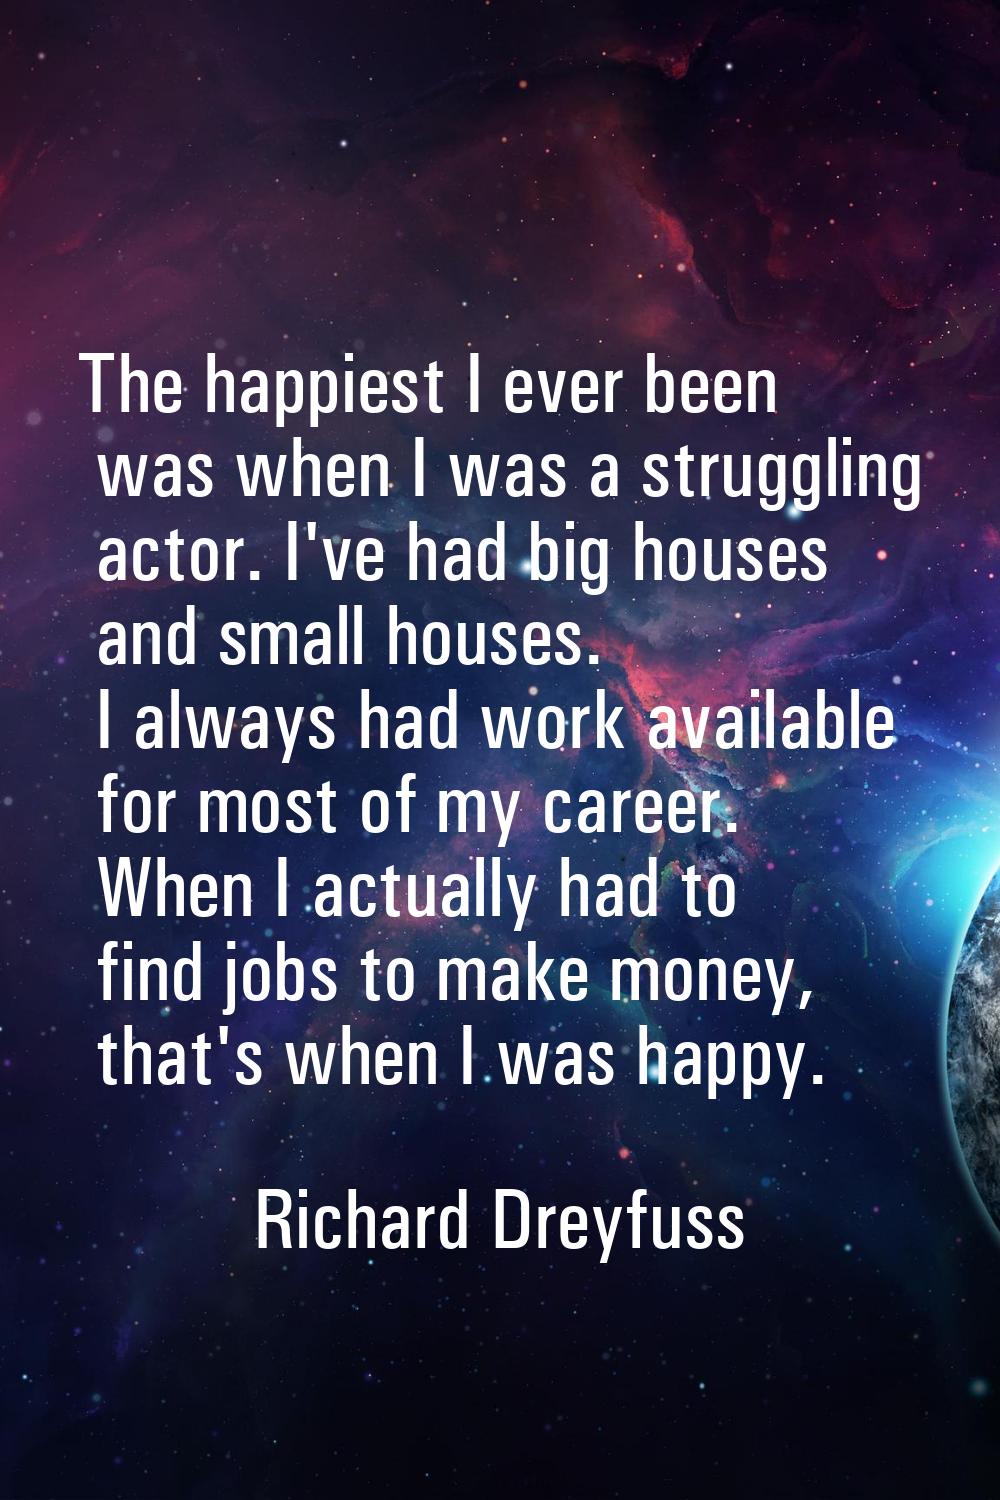 The happiest I ever been was when I was a struggling actor. I've had big houses and small houses. I